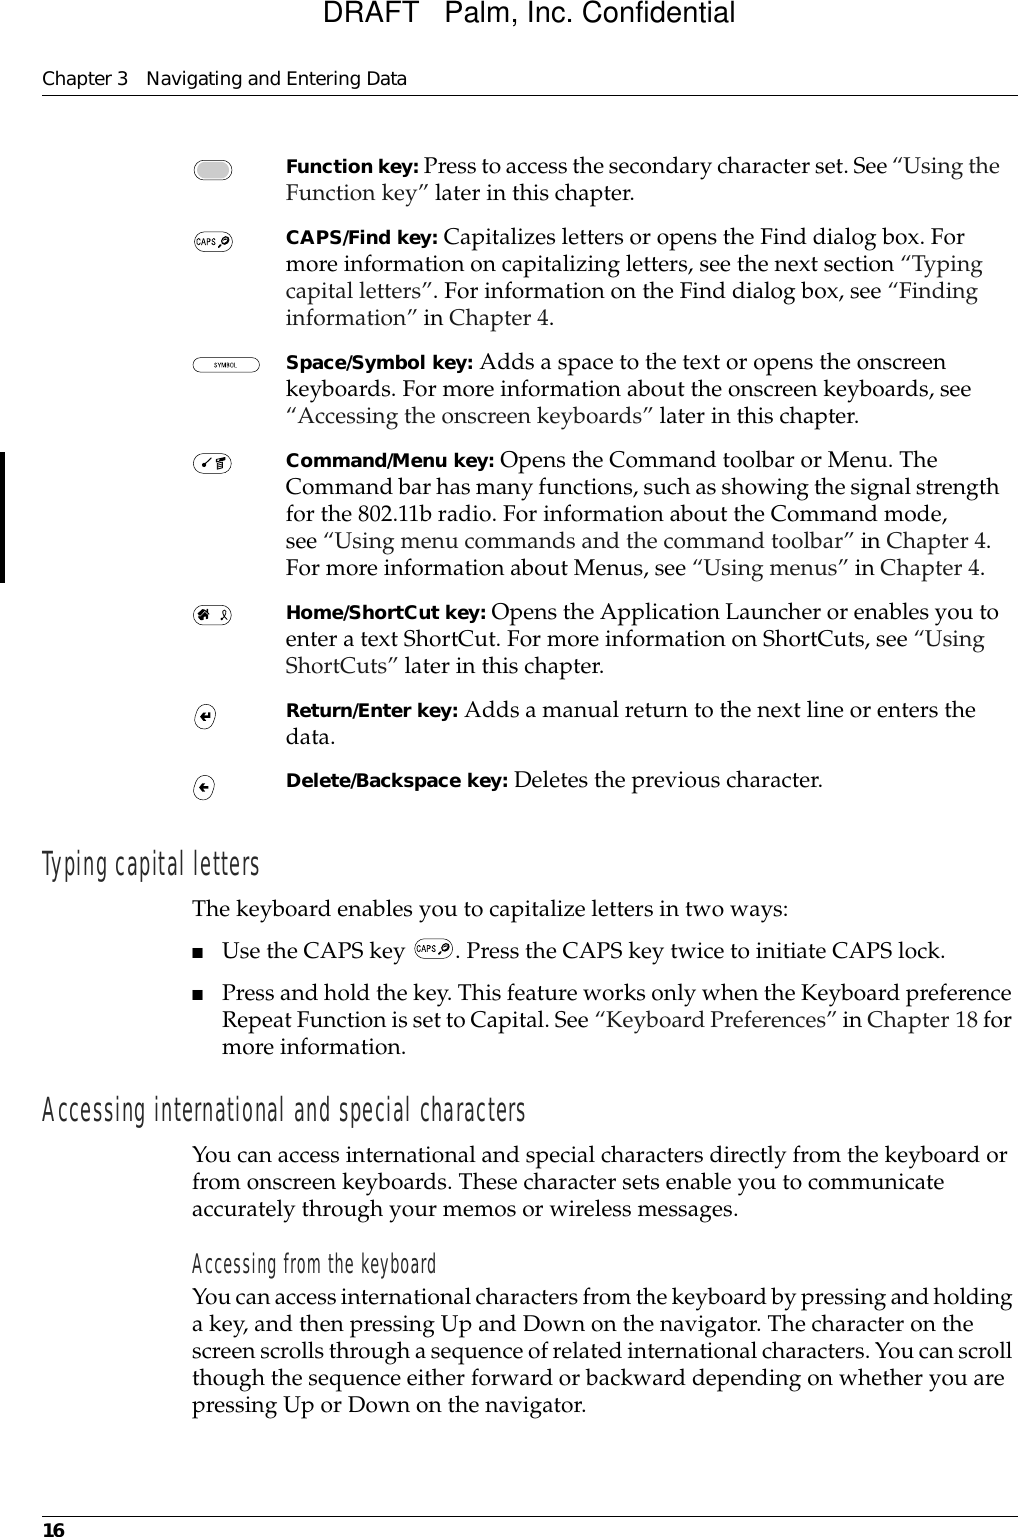 Chapter 3 Navigating and Entering Data16Typing capital lettersThe keyboard enables you to capitalize letters in two ways:■Use the CAPS key  . Press the CAPS key twice to initiate CAPS lock.■Press and hold the key. This feature works only when the Keyboard preference Repeat Function is set to Capital. See “Keyboard Preferences” in Chapter 18 for more information.Accessing international and special charactersYou can access international and special characters directly from the keyboard or from onscreen keyboards. These character sets enable you to communicate accurately through your memos or wireless messages.Accessing from the keyboardYou can access international characters from the keyboard by pressing and holding a key, and then pressing Up and Down on the navigator. The character on the screen scrolls through a sequence of related international characters. You can scroll though the sequence either forward or backward depending on whether you are pressing Up or Down on the navigator. Function key: Press to access the secondary character set. See “Using the Function key” later in this chapter.CAPS/Find key: Capitalizes letters or opens the Find dialog box. For more information on capitalizing letters, see the next section “Typing capital letters”. For information on the Find dialog box, see “Finding information” in Chapter 4.Space/Symbol key: Adds a space to the text or opens the onscreen keyboards. For more information about the onscreen keyboards, see “Accessing the onscreen keyboards” later in this chapter.Command/Menu key: Opens the Command toolbar or Menu. The Command bar has many functions, such as showing the signal strength for the 802.11b radio. For information about the Command mode, see “Using menu commands and the command toolbar” in Chapter 4. For more information about Menus, see “Using menus” in Chapter 4.Home/ShortCut key: Opens the Application Launcher or enables you to enter a text ShortCut. For more information on ShortCuts, see “Using ShortCuts” later in this chapter.Return/Enter key: Adds a manual return to the next line or enters the data.Delete/Backspace key: Deletes the previous character.DRAFT   Palm, Inc. Confidential